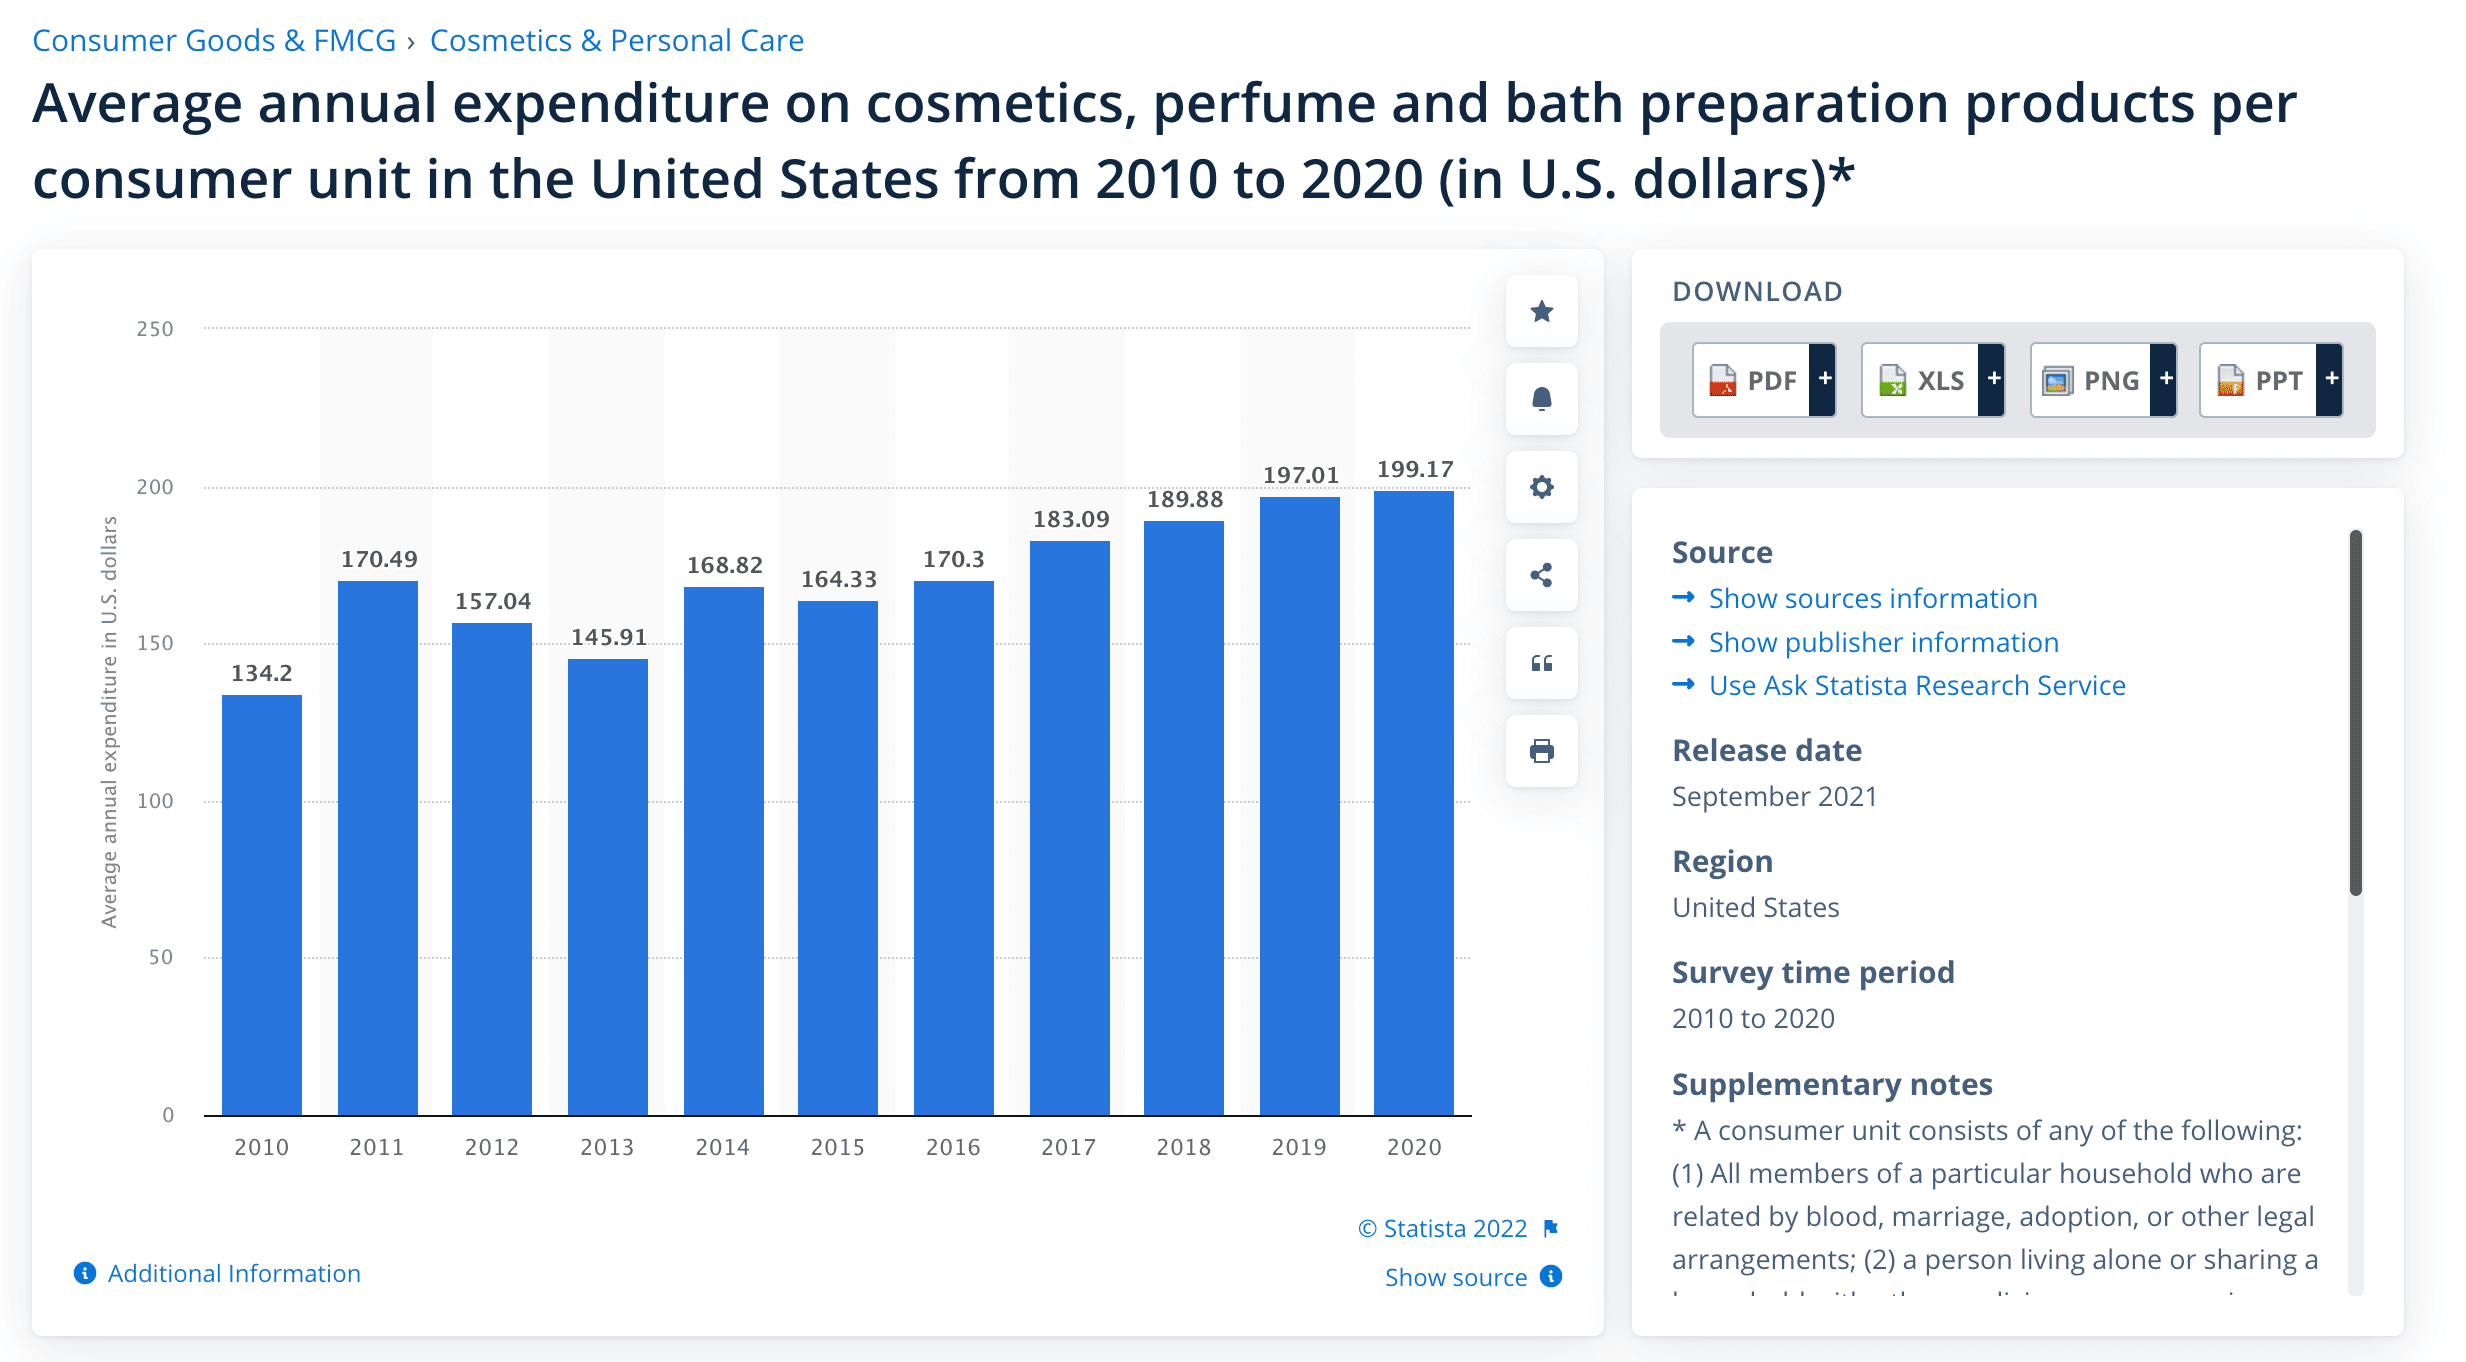 Average annual expenditure on cosmetics, perfume and bath